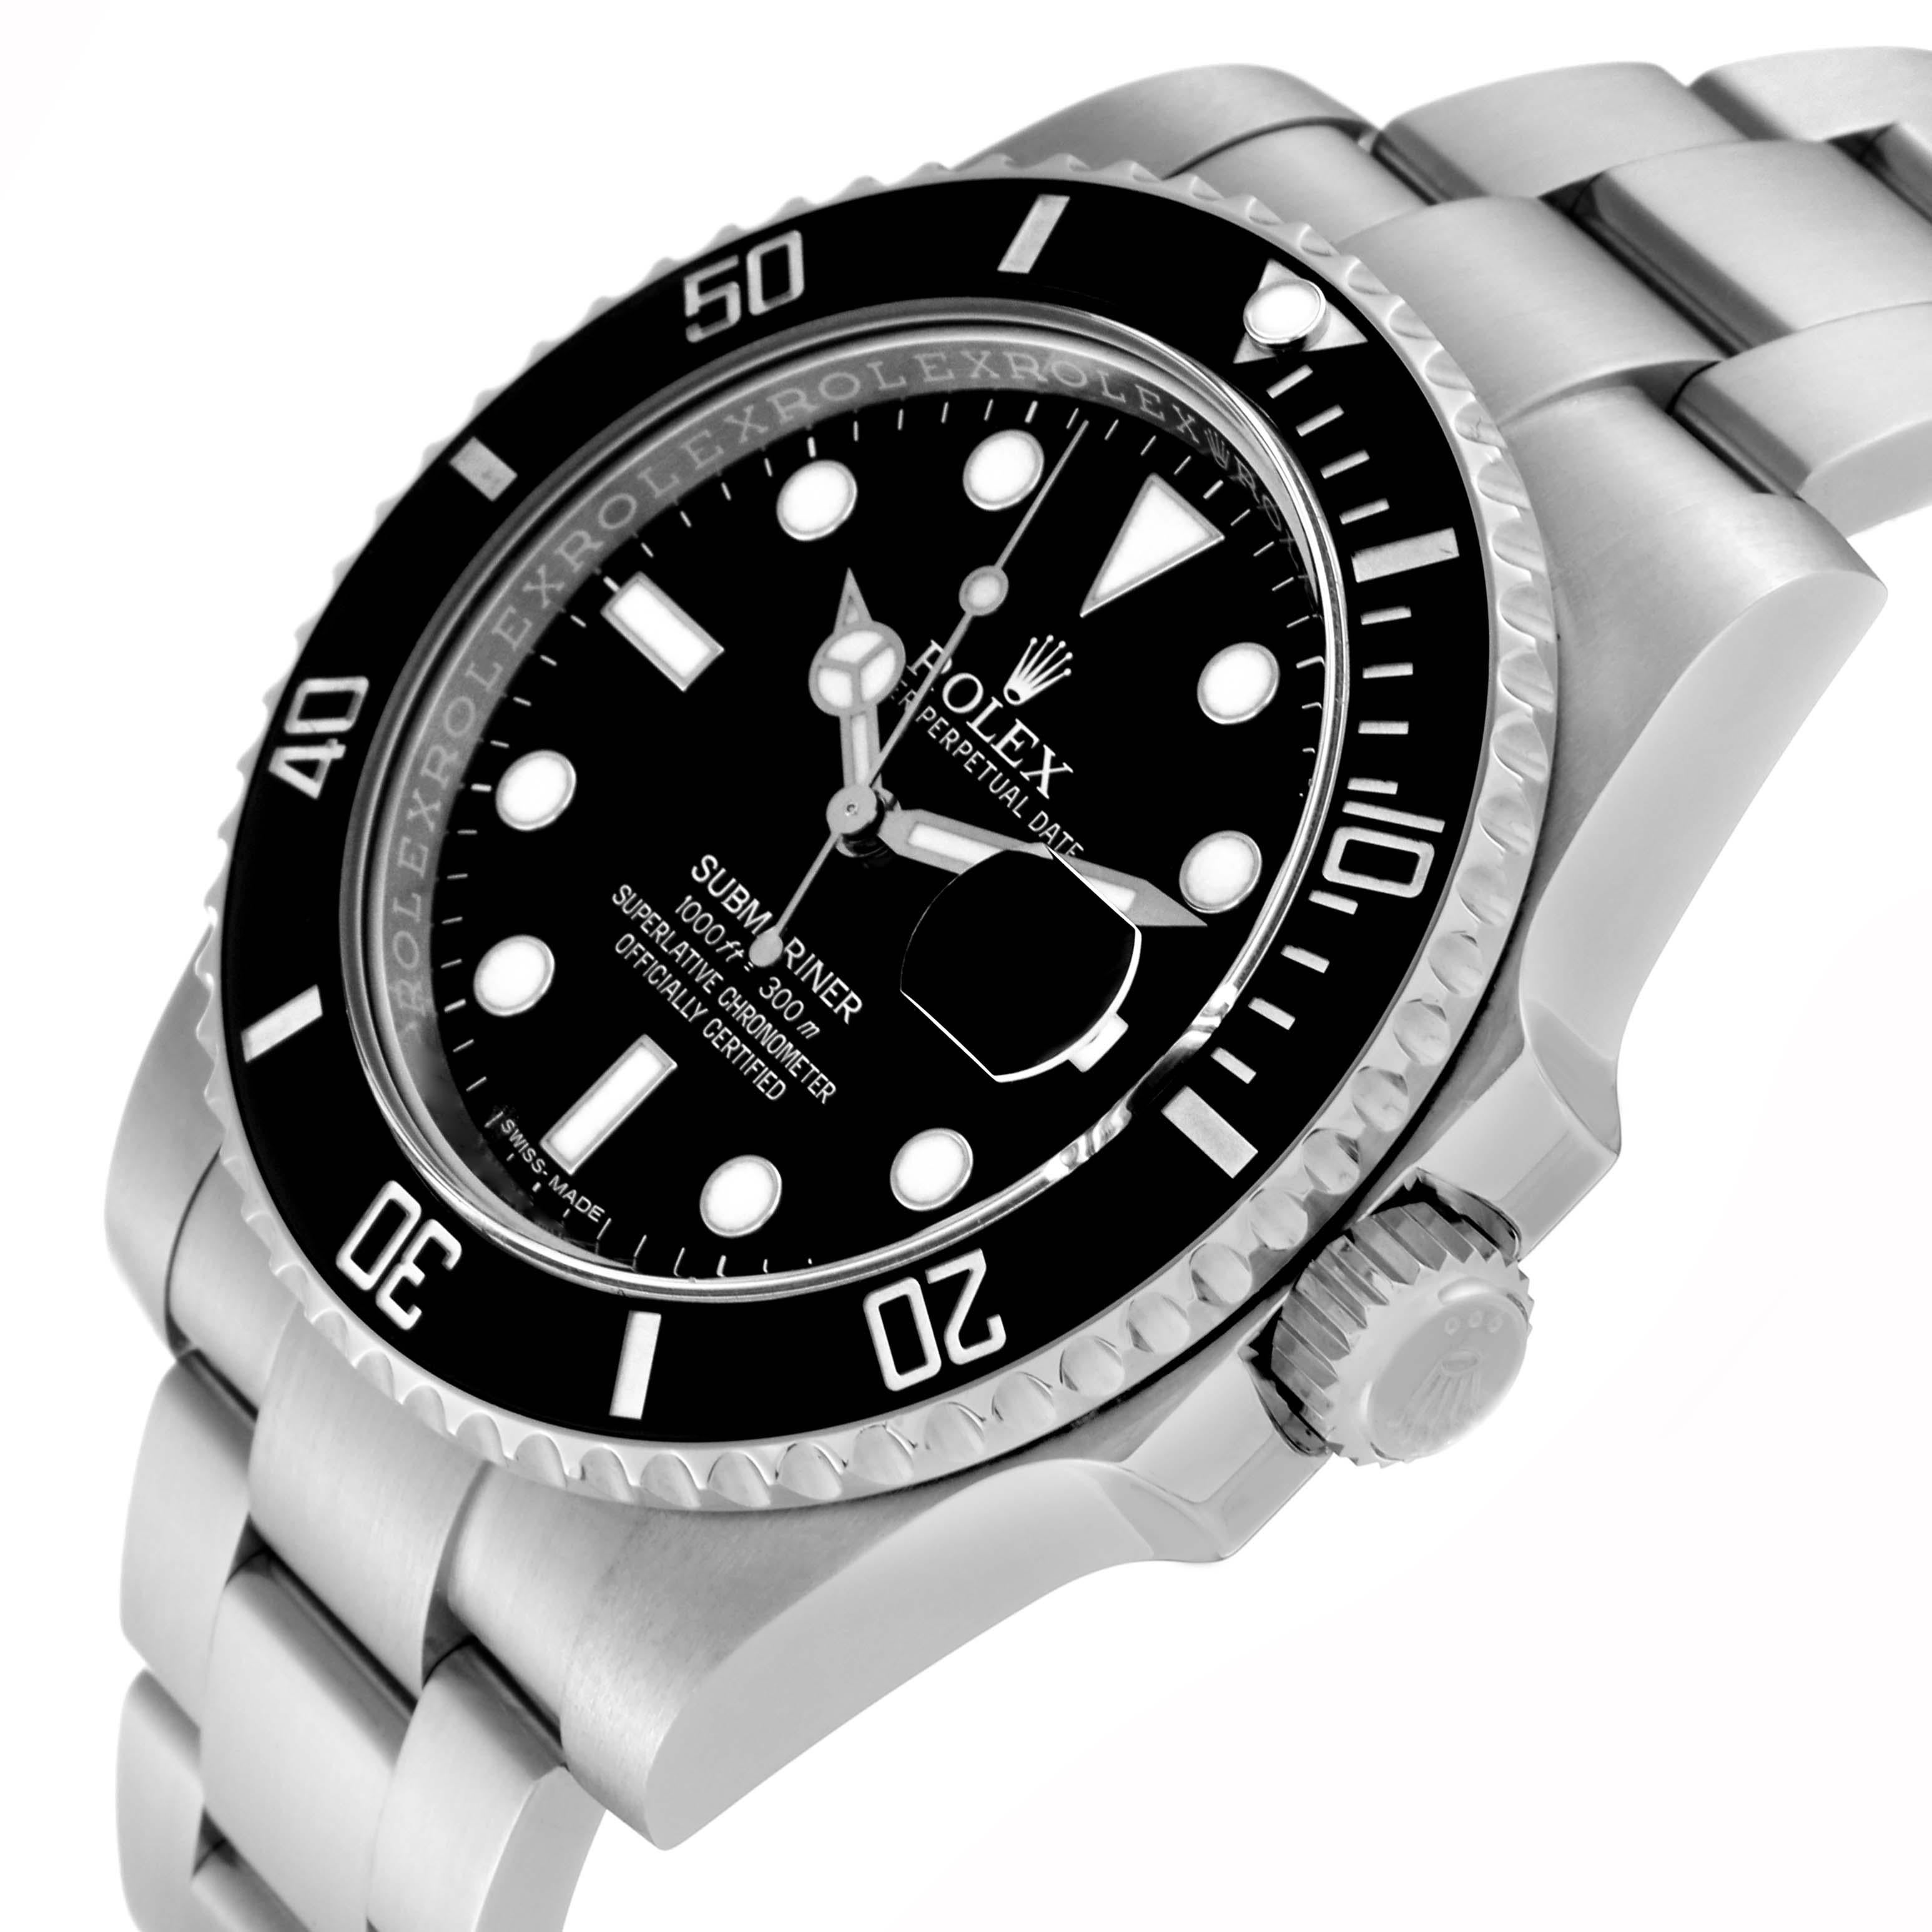 Rolex Submariner Date Black Dial Steel Mens Watch 116610 For Sale 2